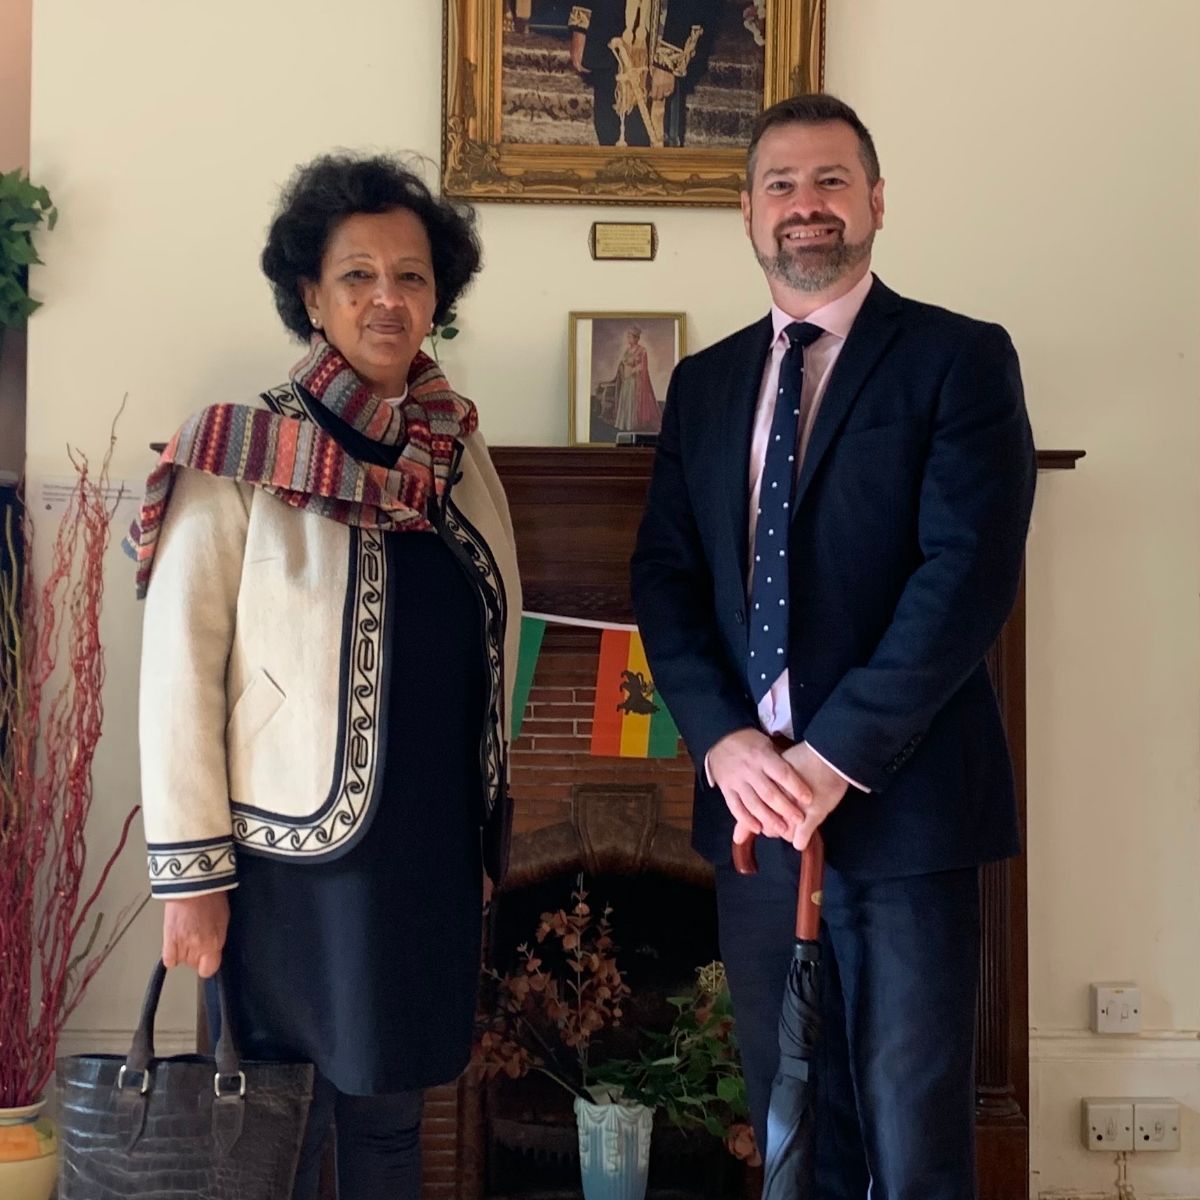 Cllr Kevin Guy, right, leader of Bath and North East Somerset Council, with Princess Esther Sellassie Antohin, co-chair of Fairfield House Bath CIC